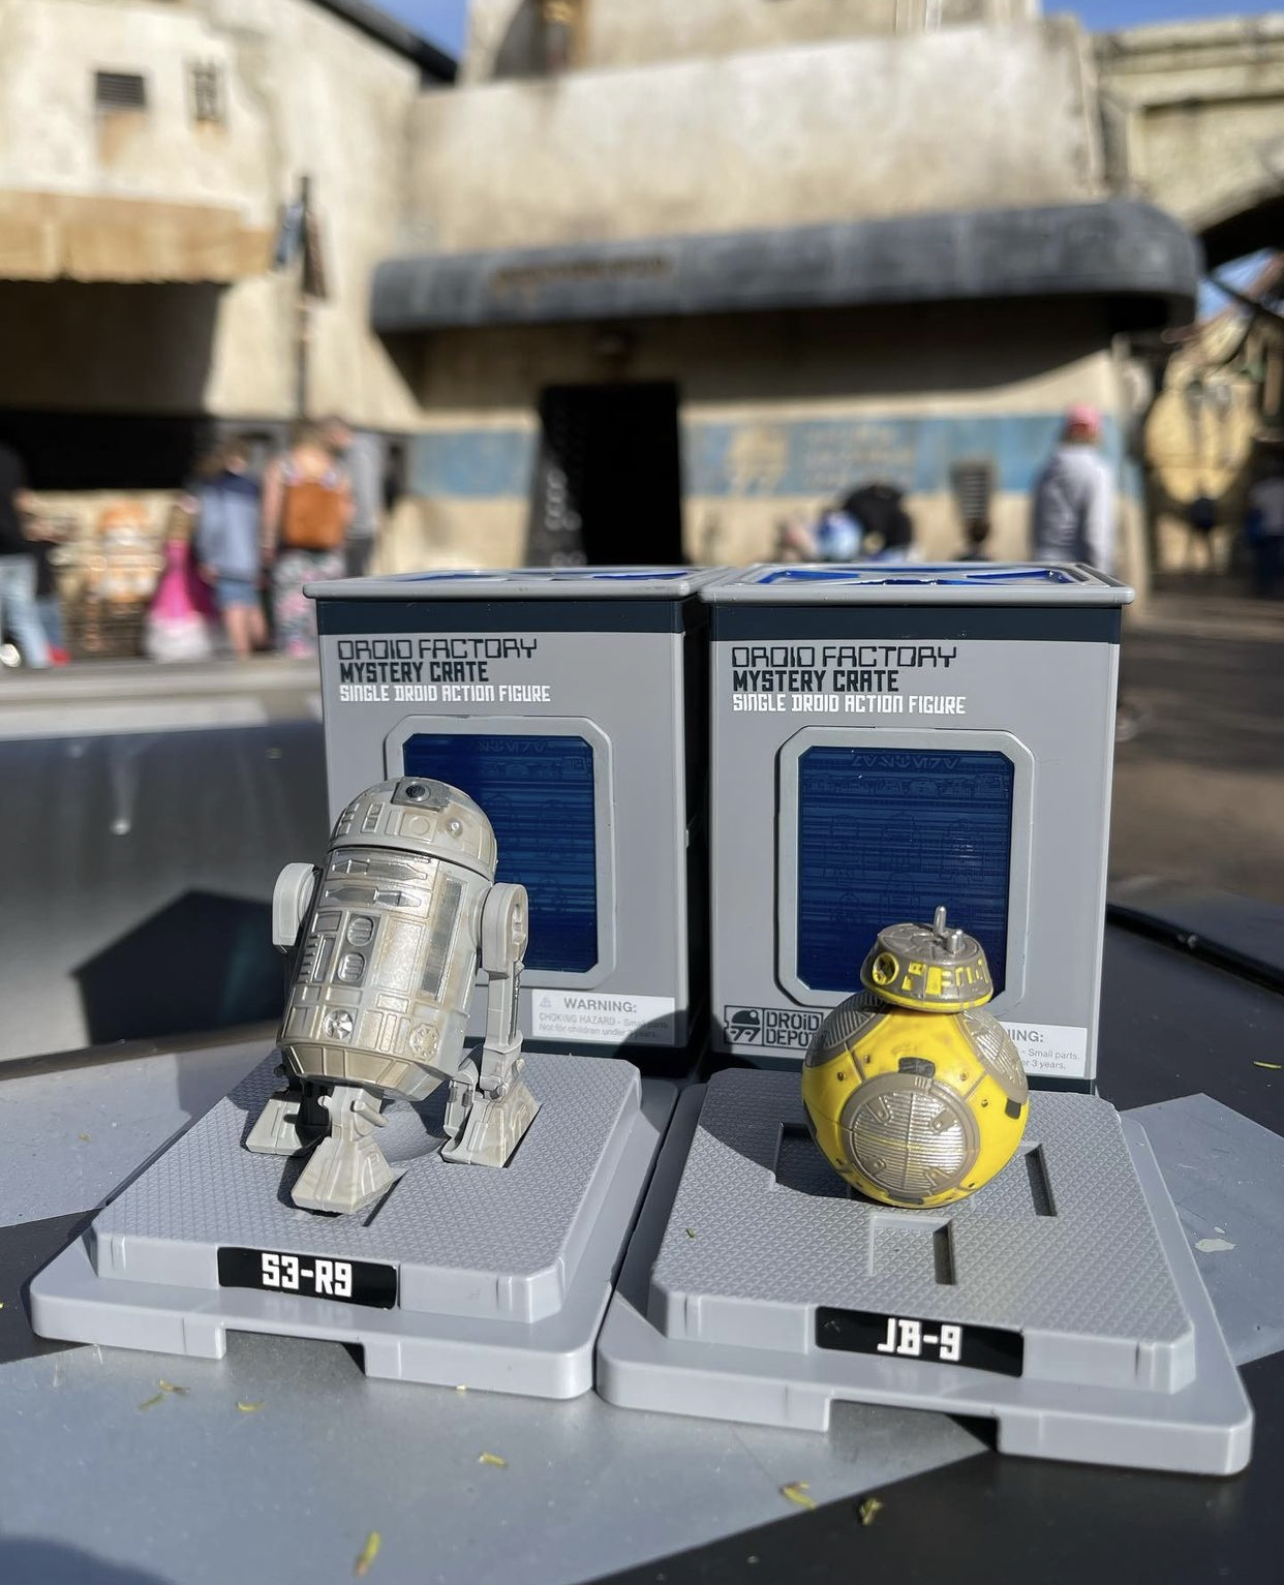 Star Wars: Galaxy's Edge Update - Lightsaber Pommels, Dewback Chili Noodles, Chewbacca Life Day Plush & More | Anakin and His Angel